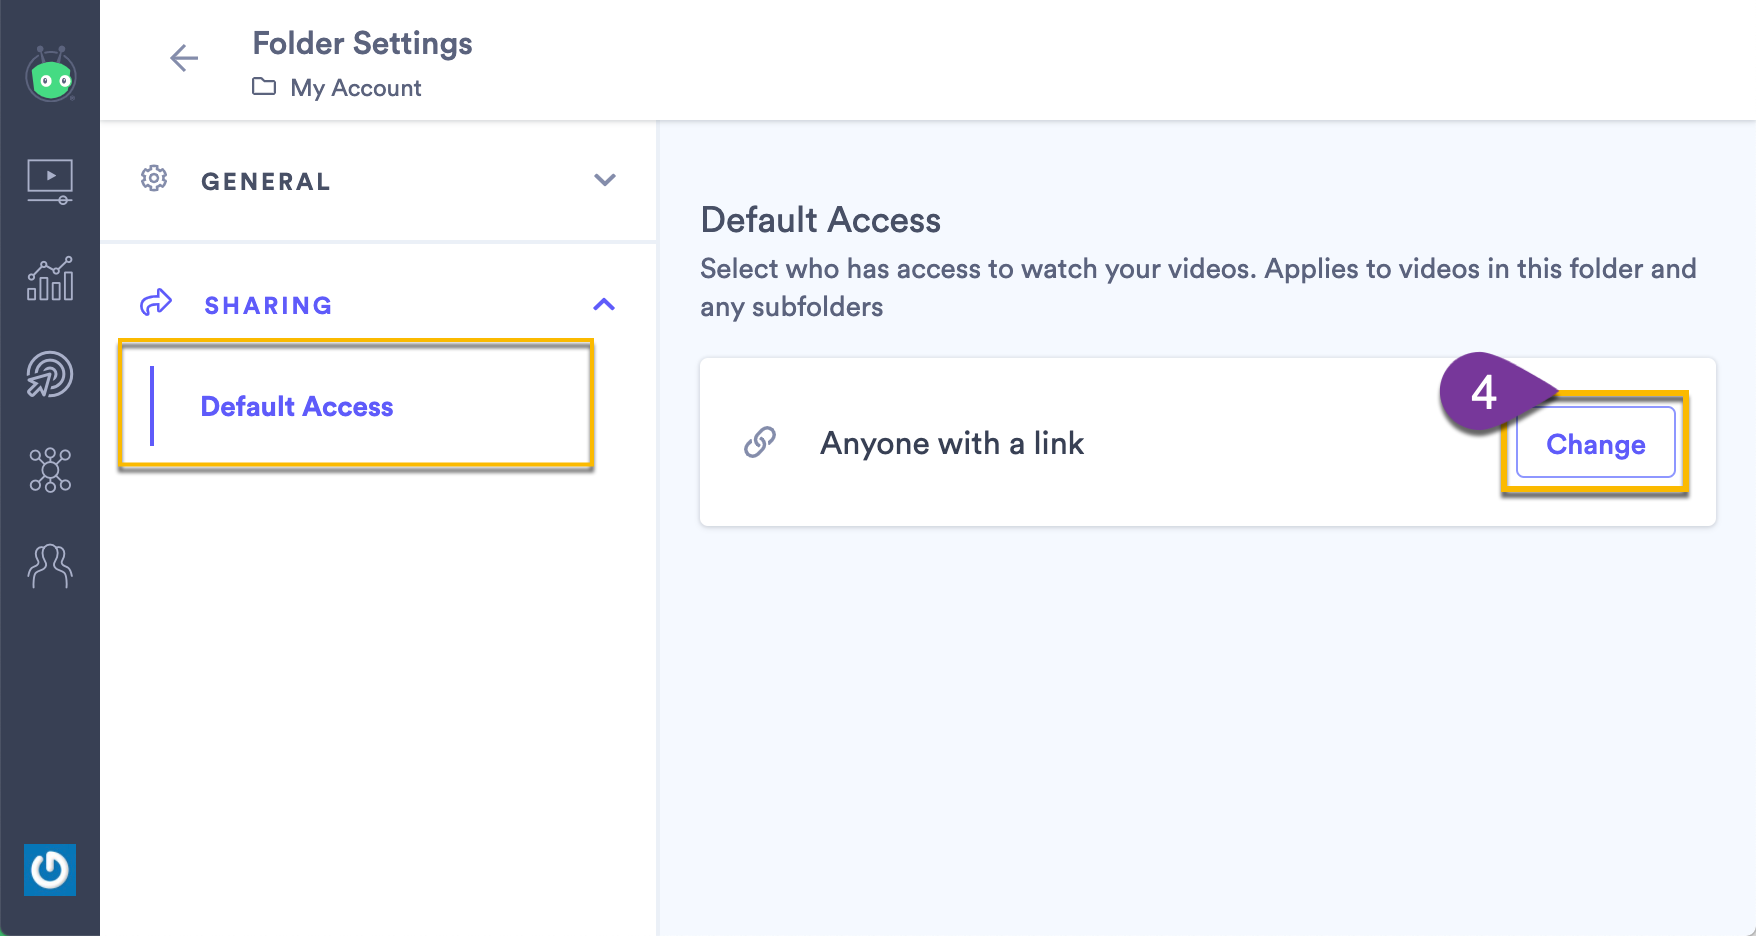 Changing the access settings for the folder